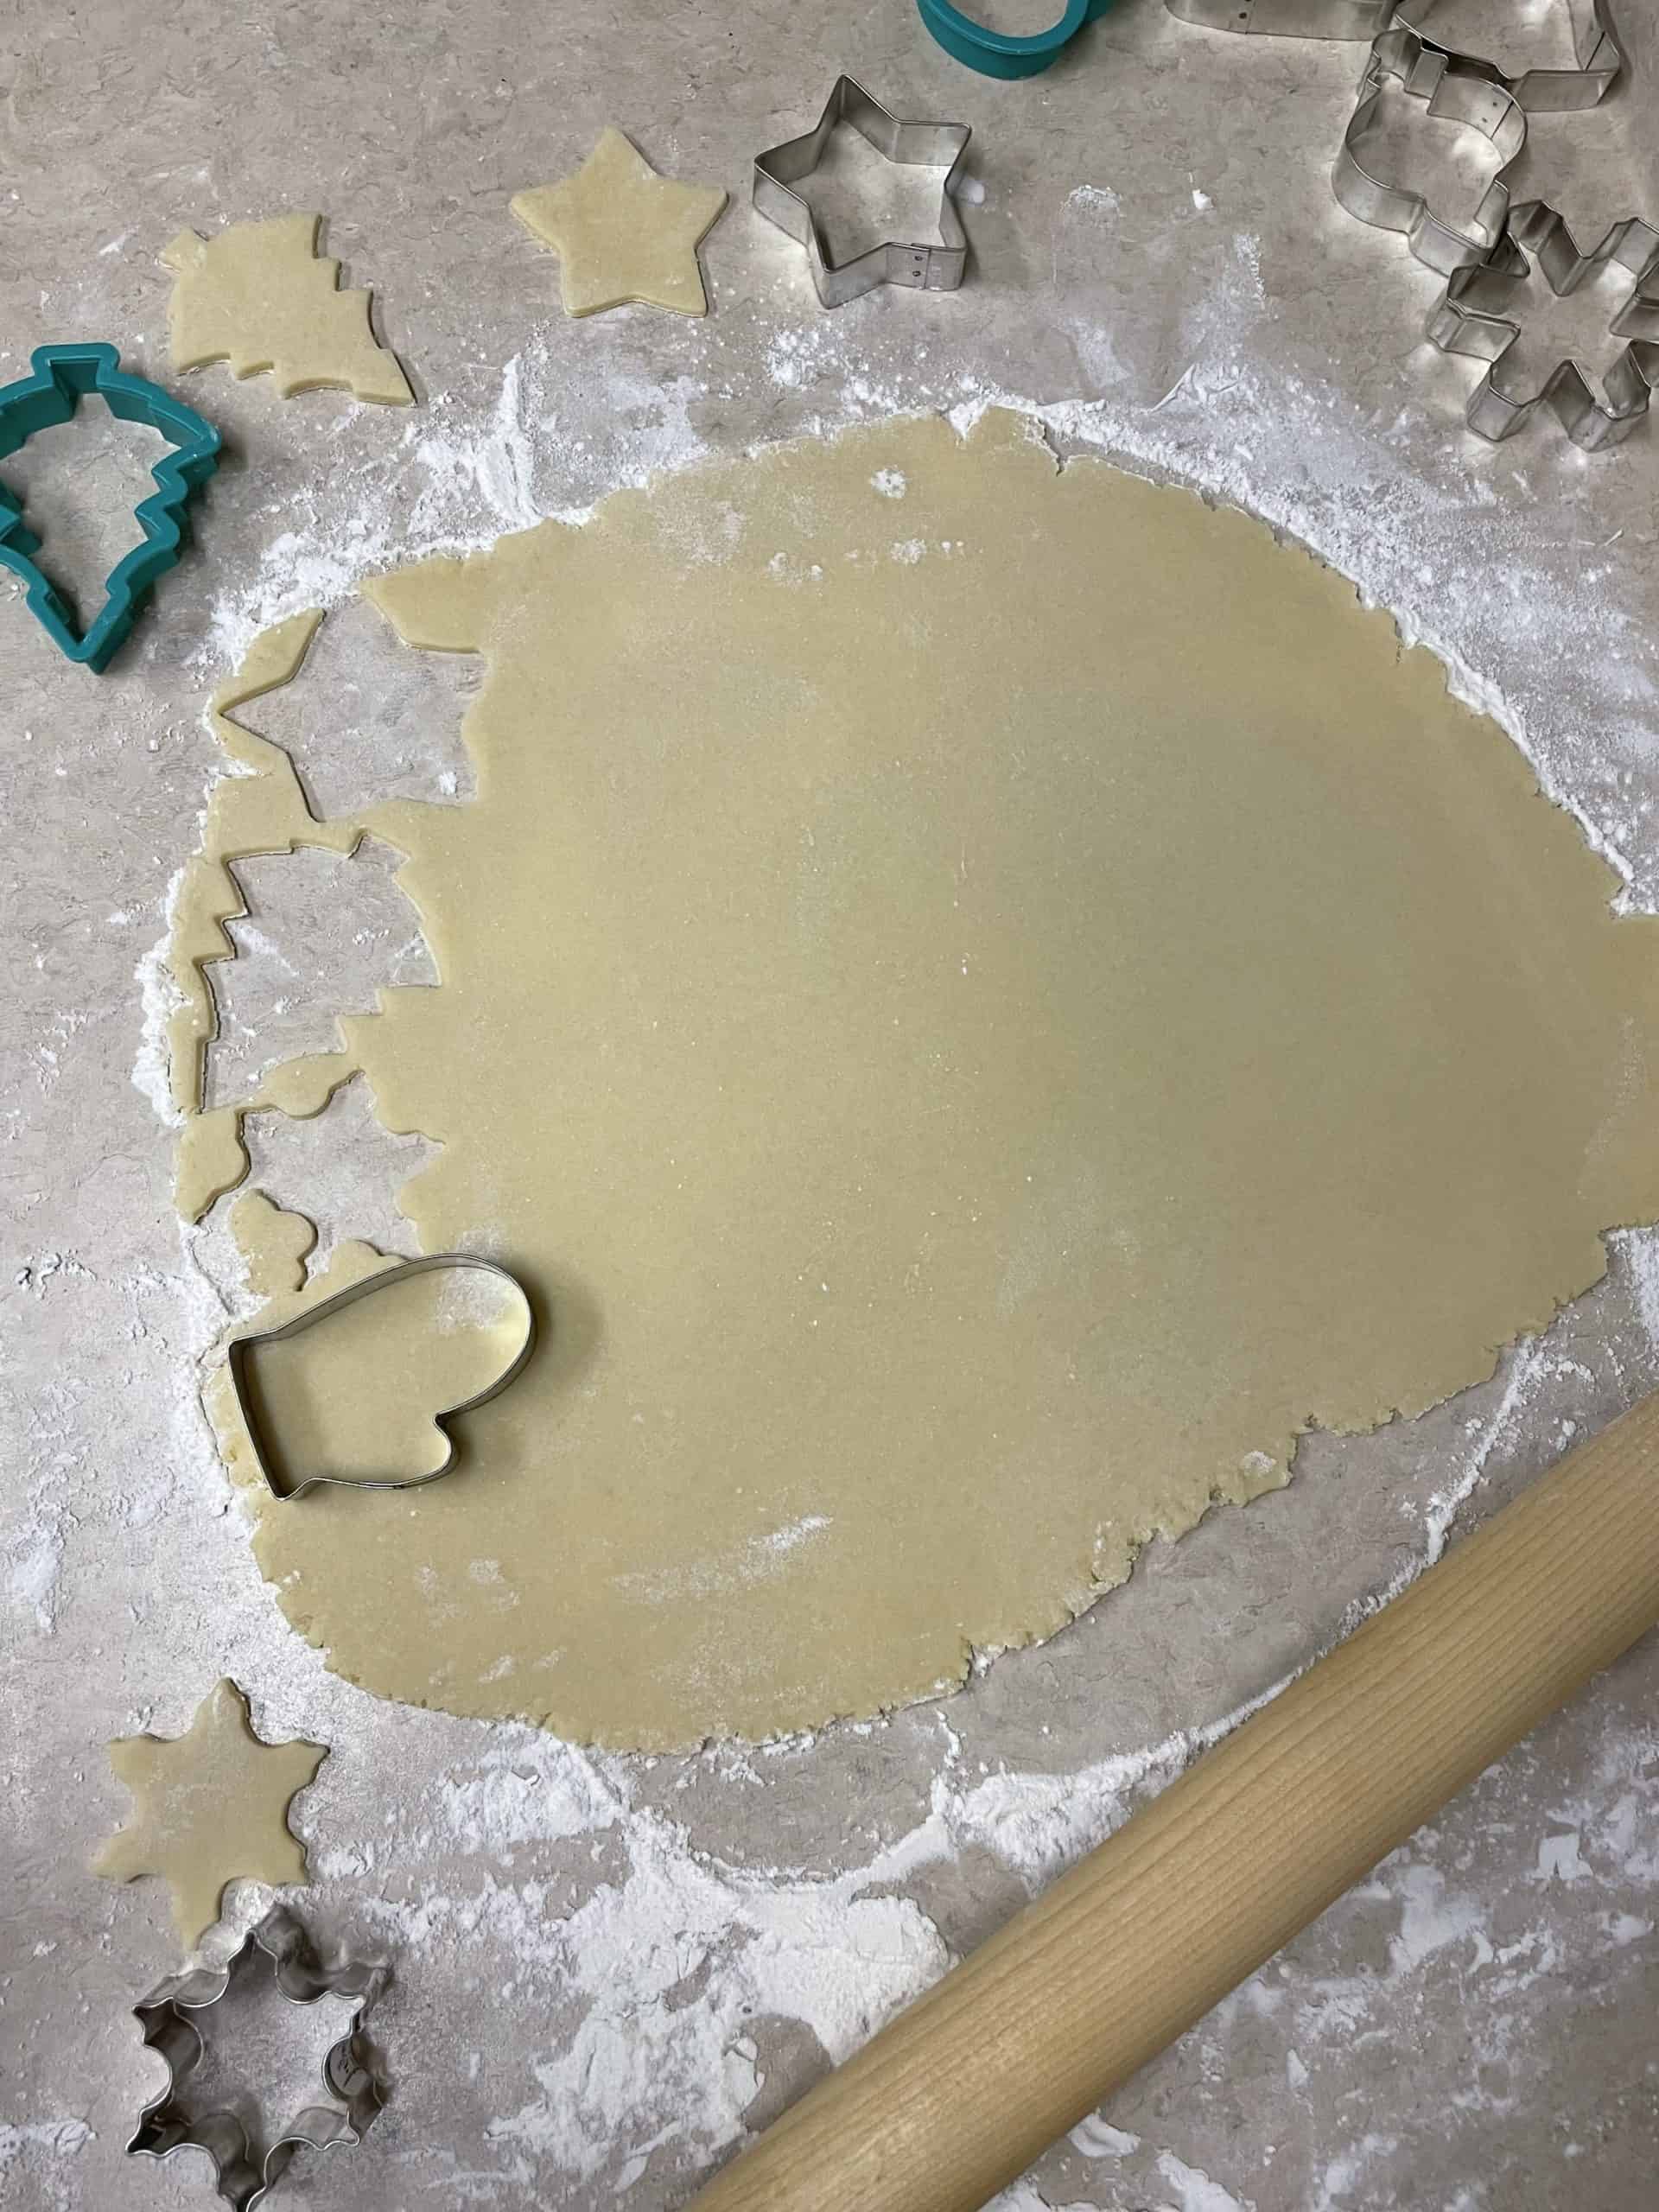 Using cookie cutters to cut the rollout sugar cookie dough.